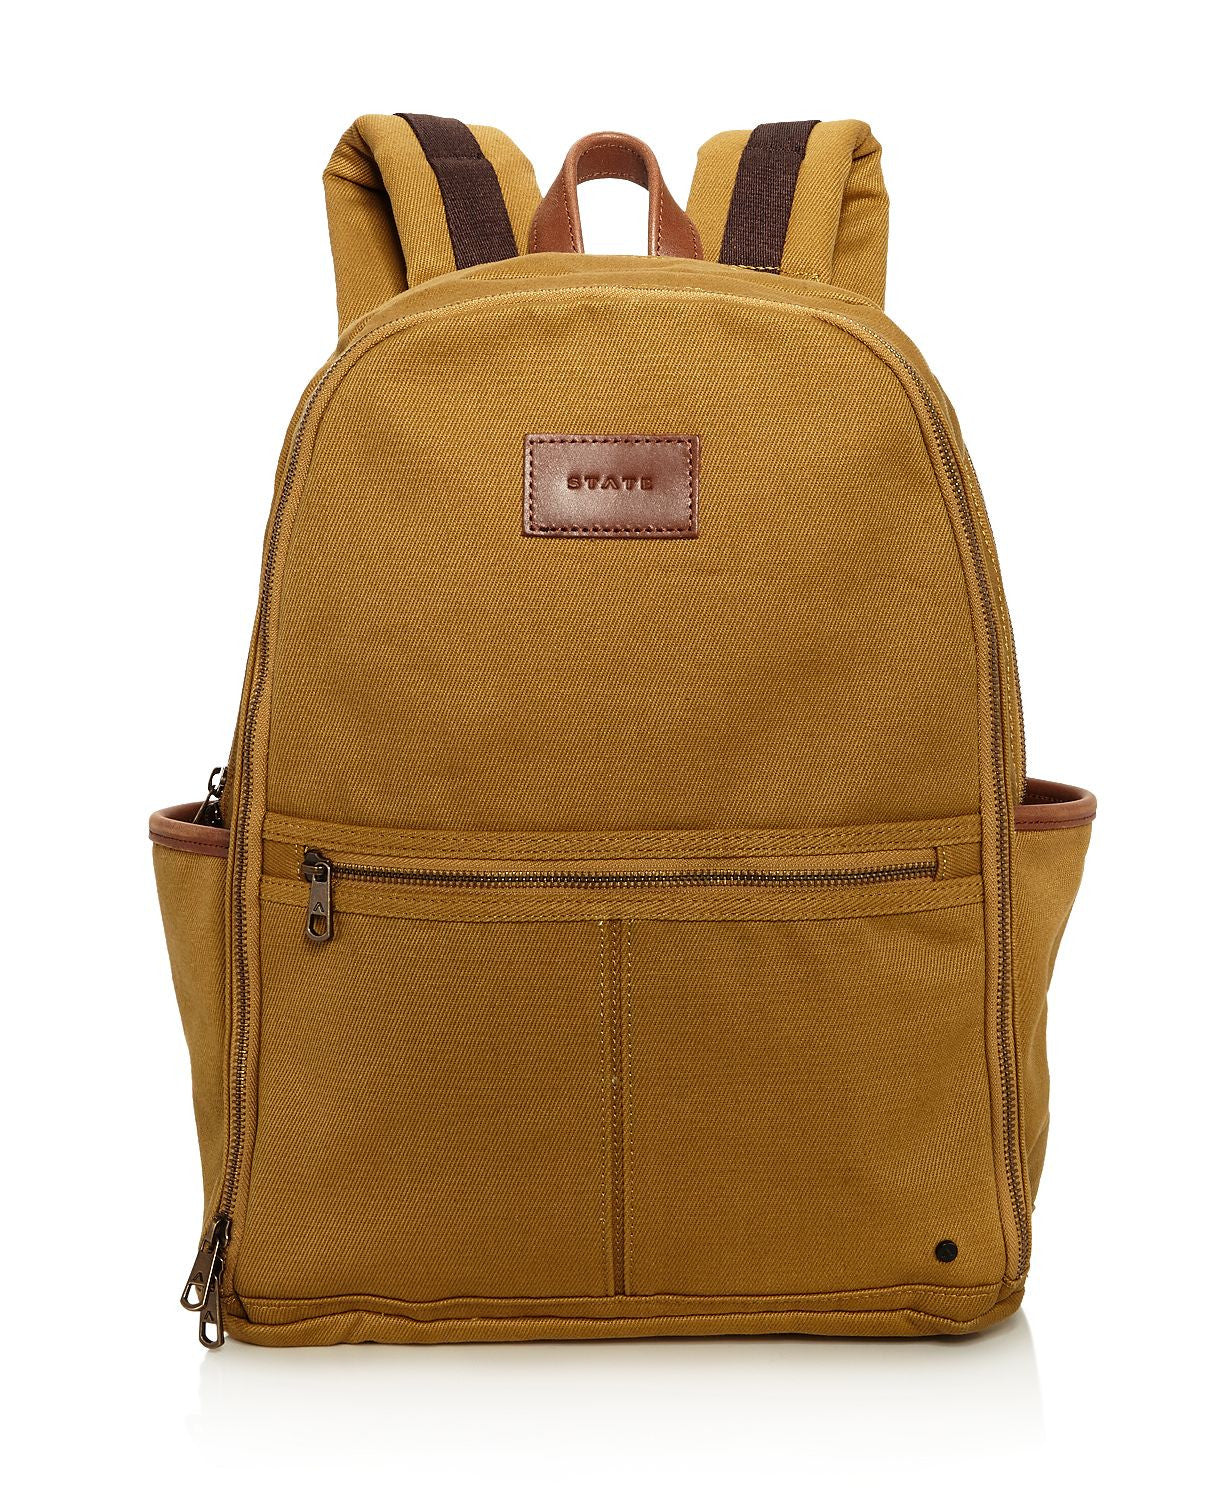 State Bedford Cotton Twill Backpack Tan